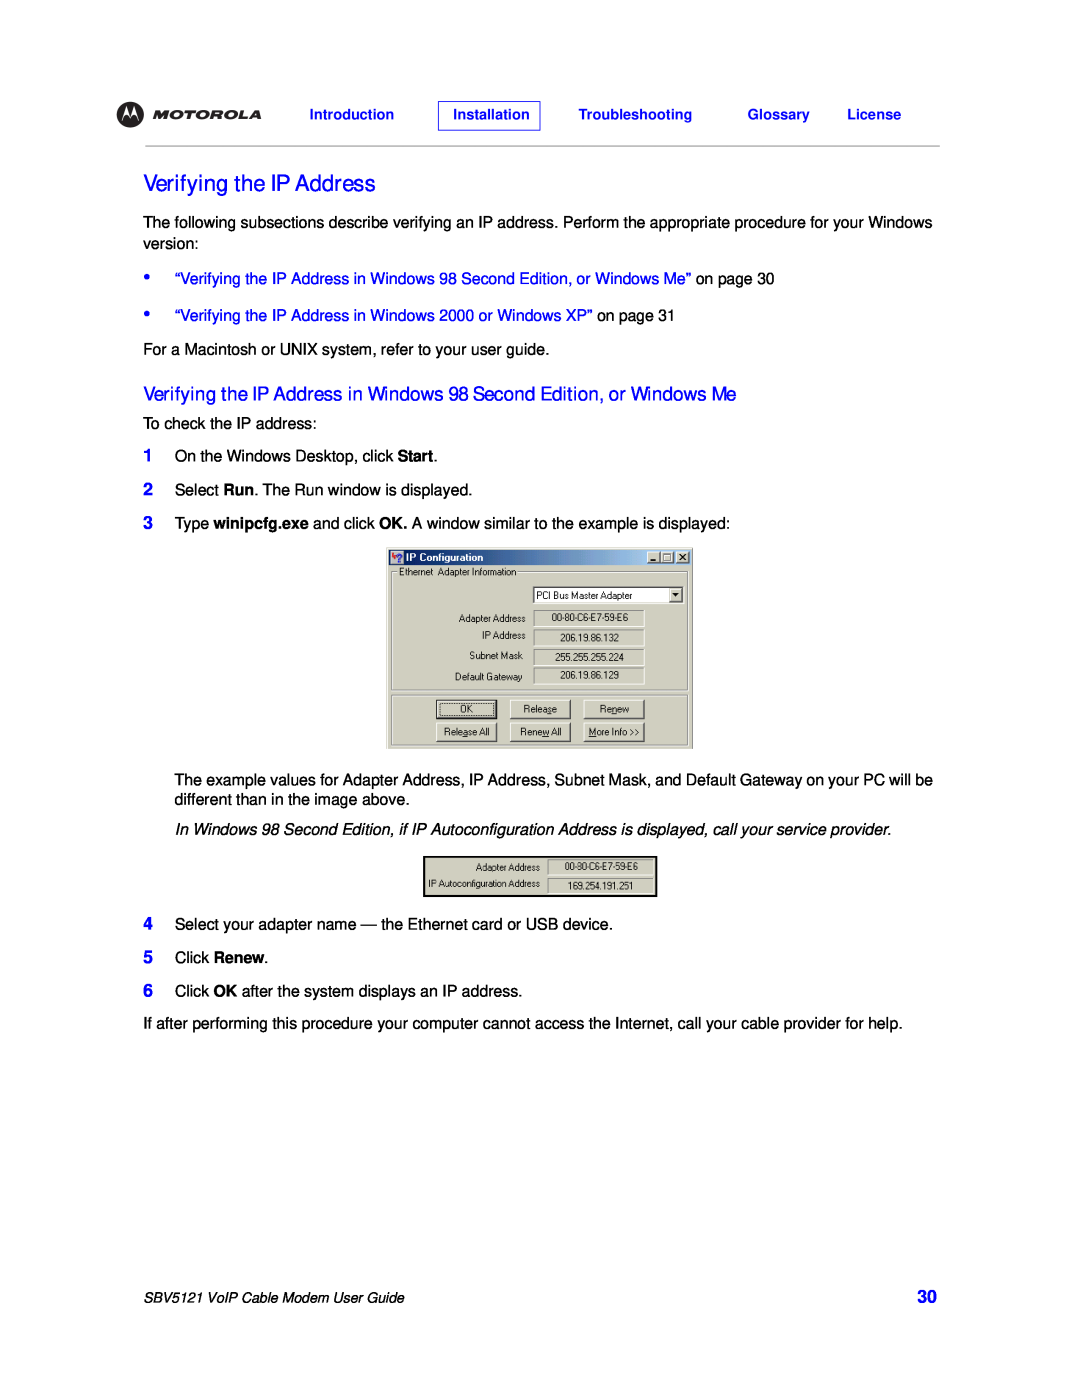 Nikon SBV5121 manual Verifying the IP Address in Windows 98 Second Edition, or Windows Me 